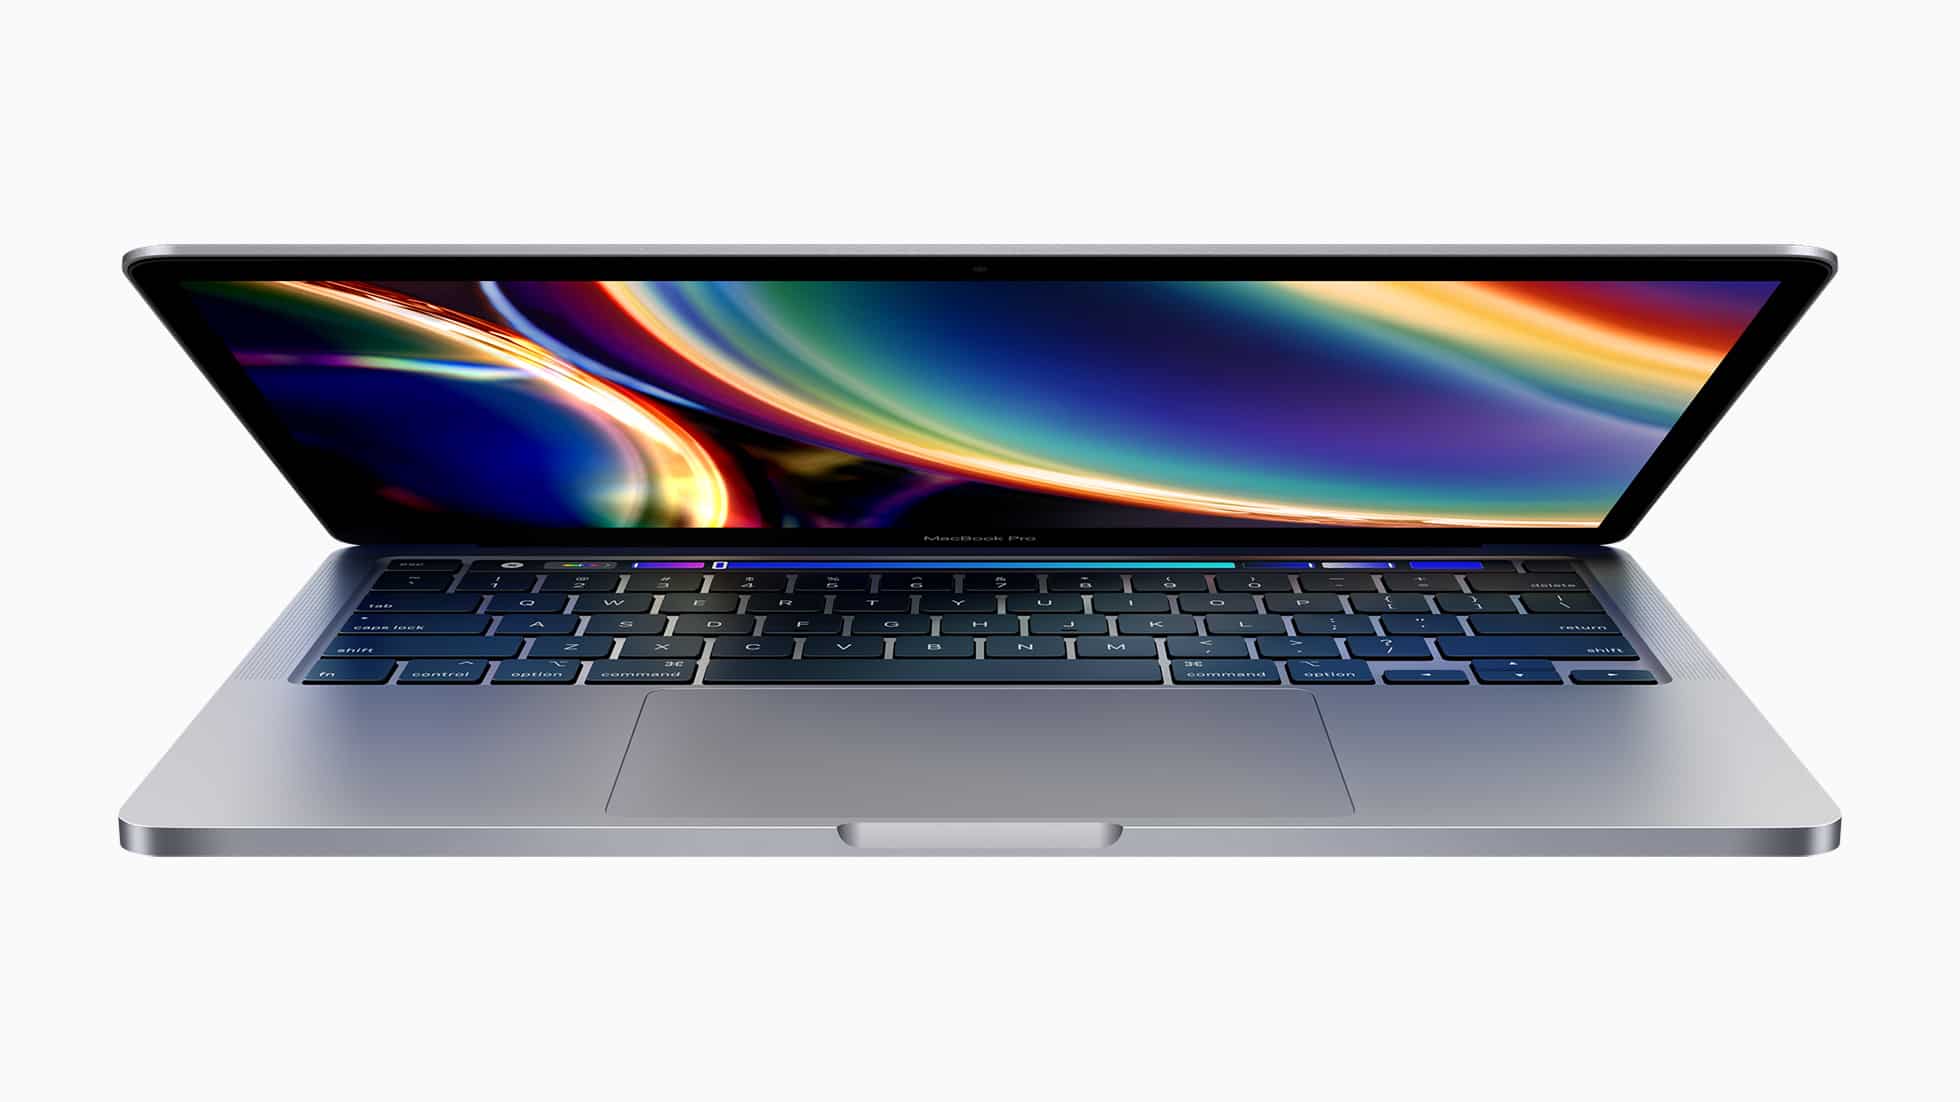 Apple updates the 13-inch MacBook Pro, now with Magic Keyboard